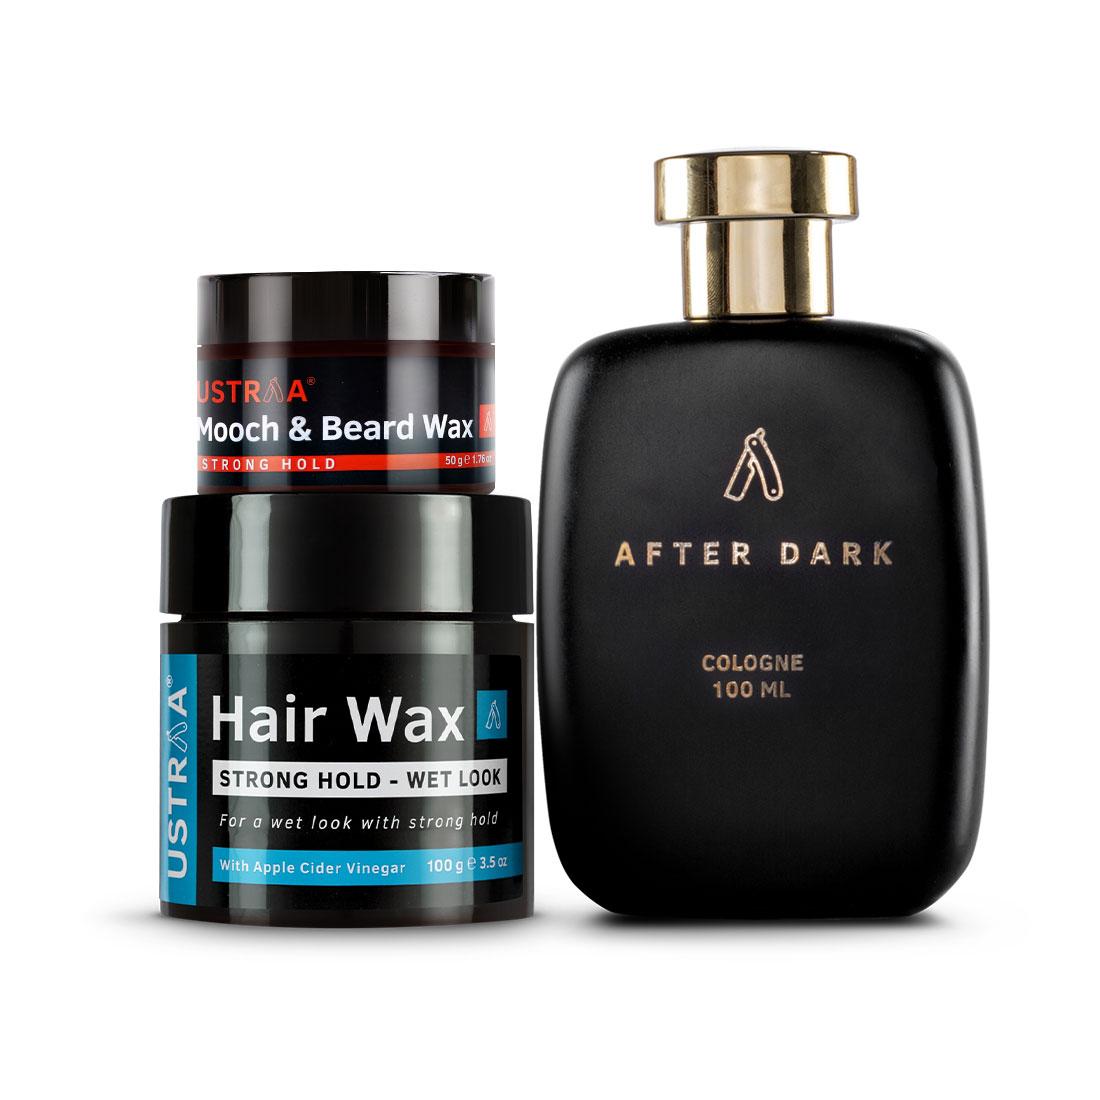 Ustraa Complete Styling Pack For Men: After Dark Cologne + Mooch & Beard Wax + Hair Wax